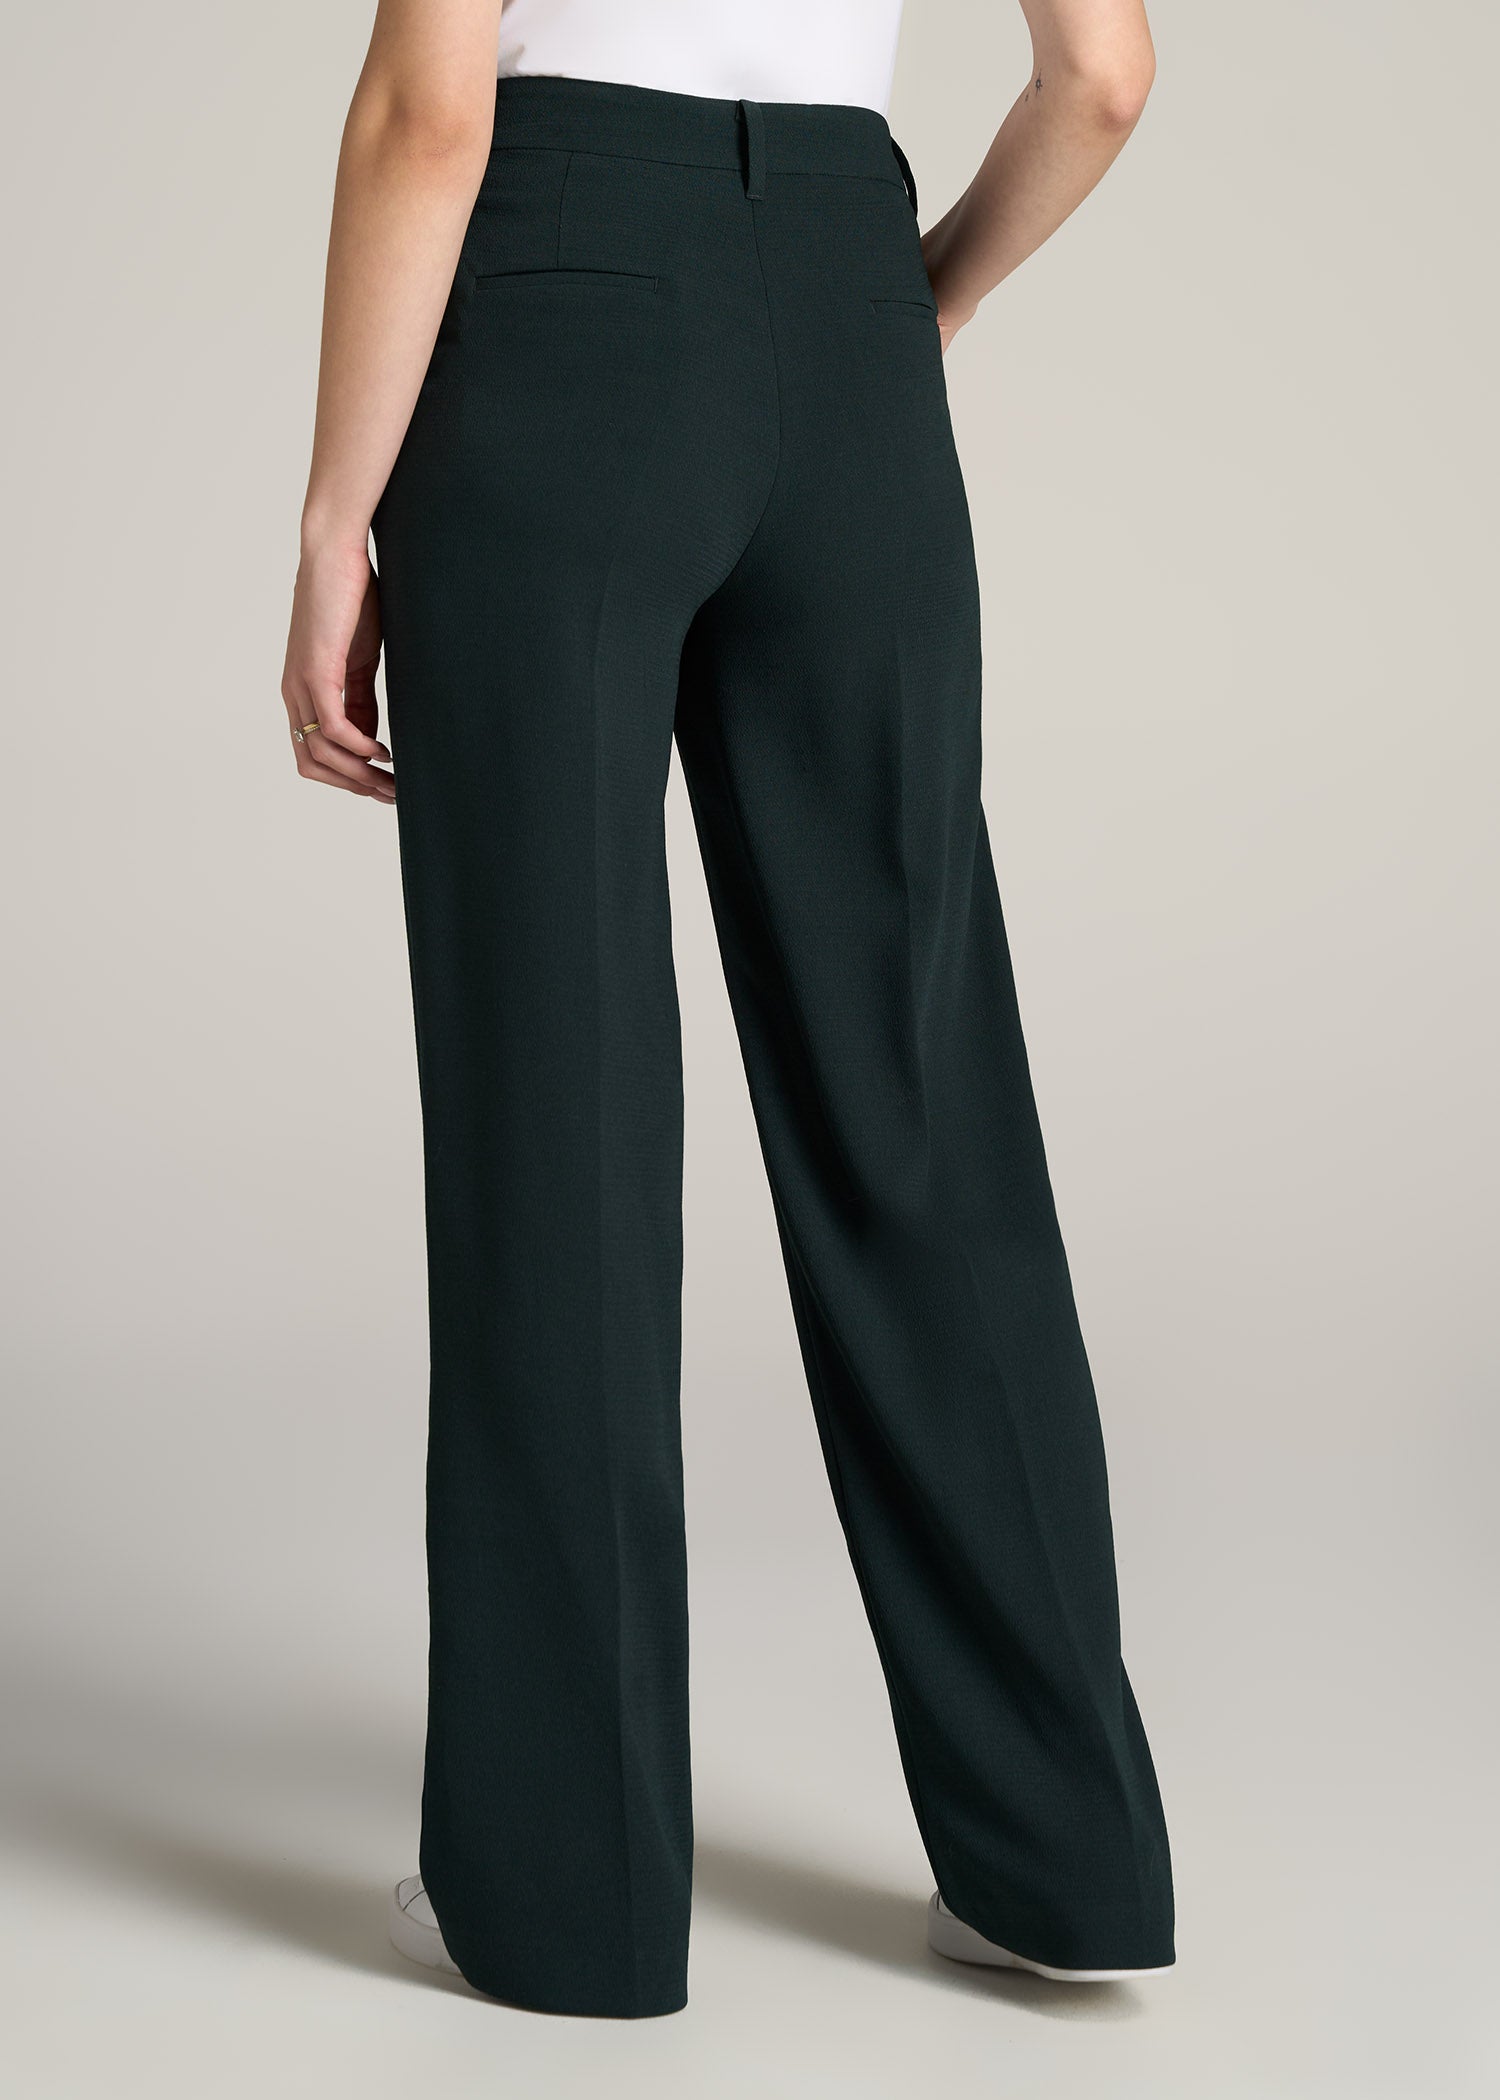 Tall Women's Trousers, Long Length Ladies Trousers